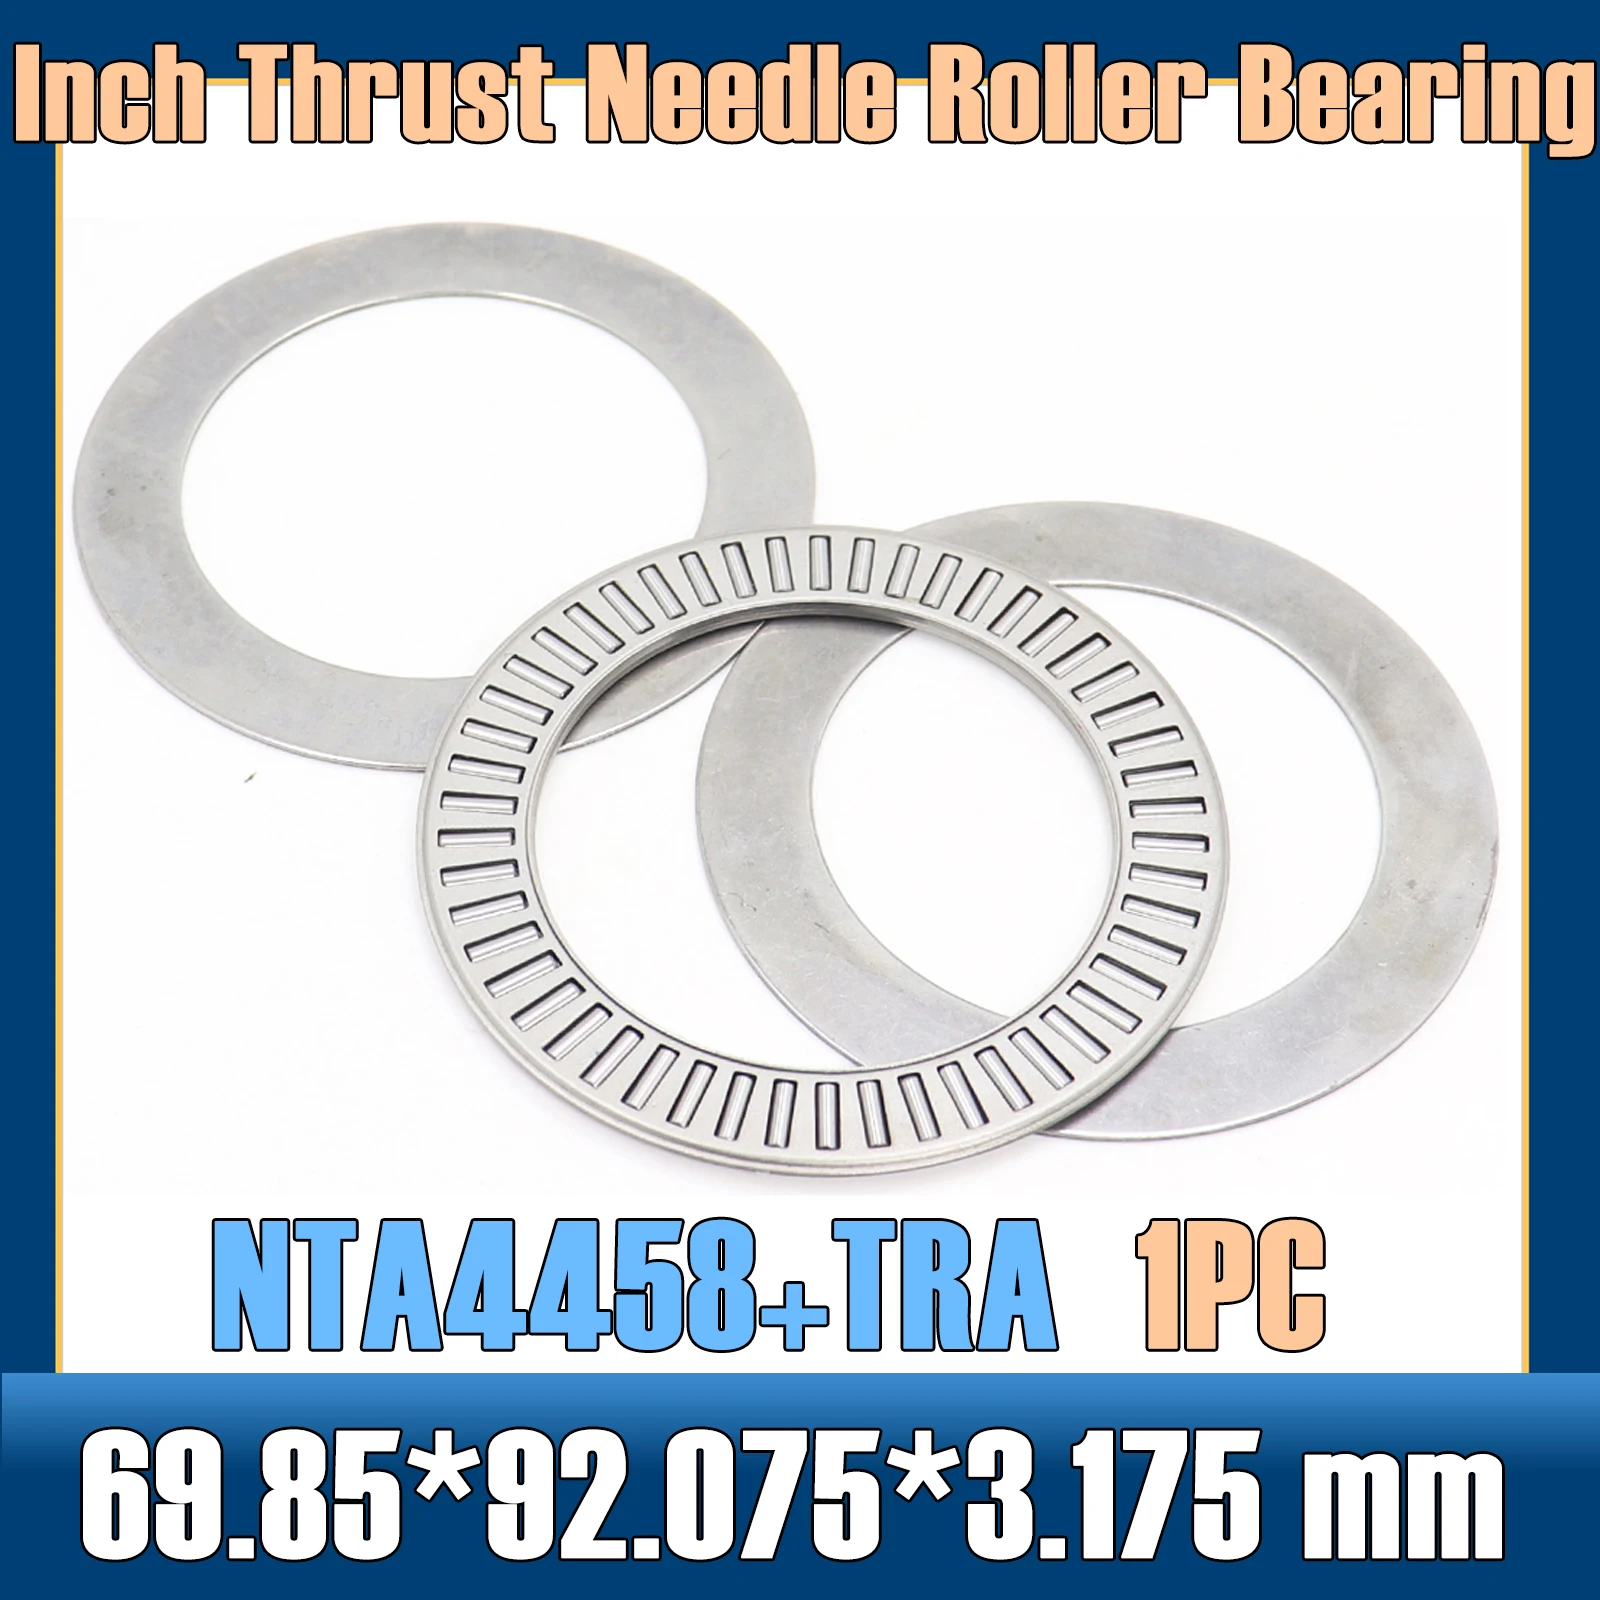 

NTA4458 + TRA Inch Thrust Needle Roller Bearing With Two TRA4458 Washers 69.85*92.075*3.175 mm ( 1 PC ) TC4458 NTA 4458 Bearings